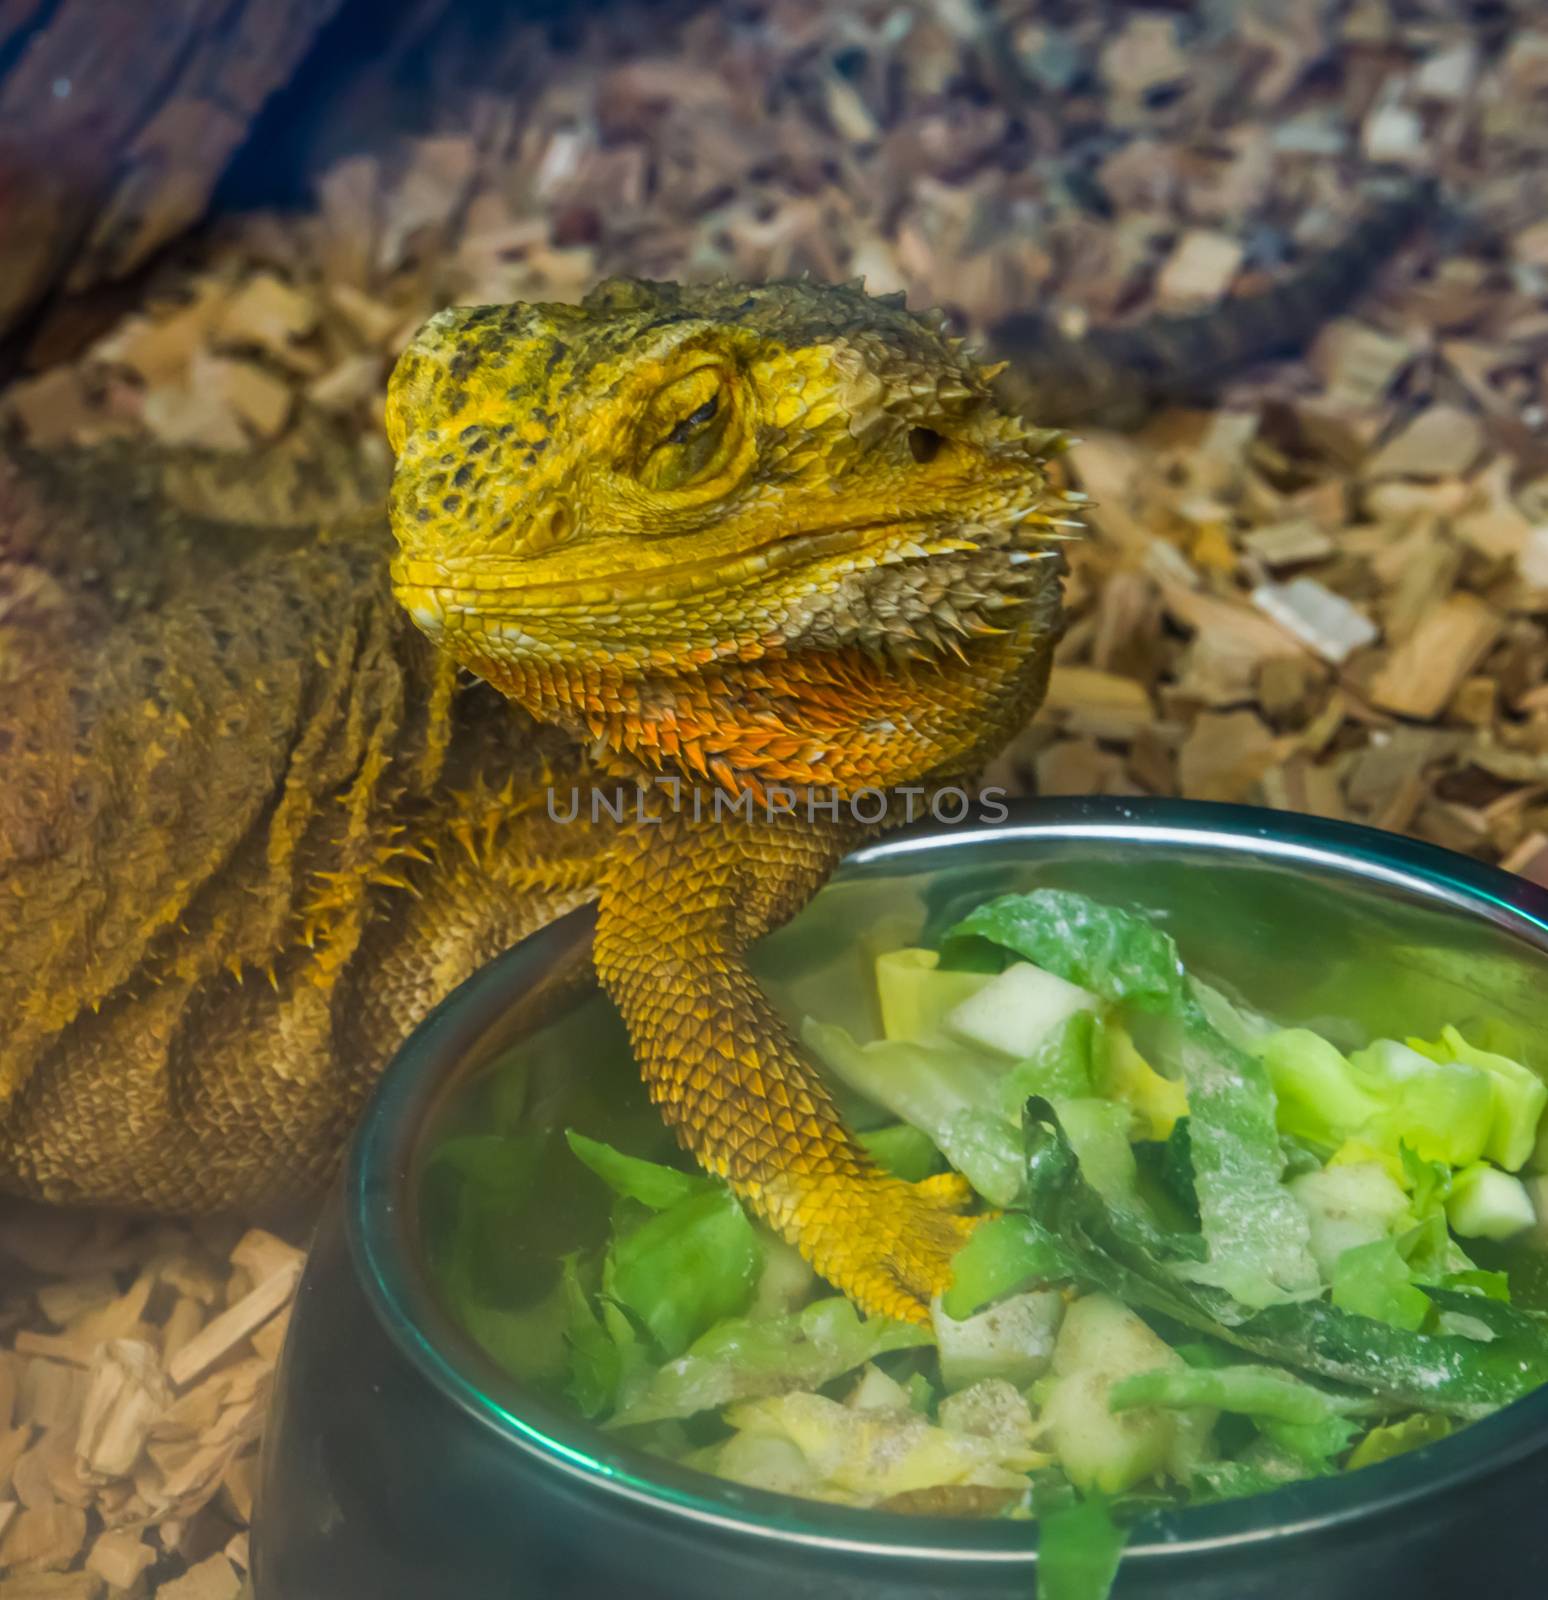 closeup of a bearded dragon lizard standing at its feeding bowl, tropical reptile specie, popular terrarium pet in herpetoculture by charlottebleijenberg